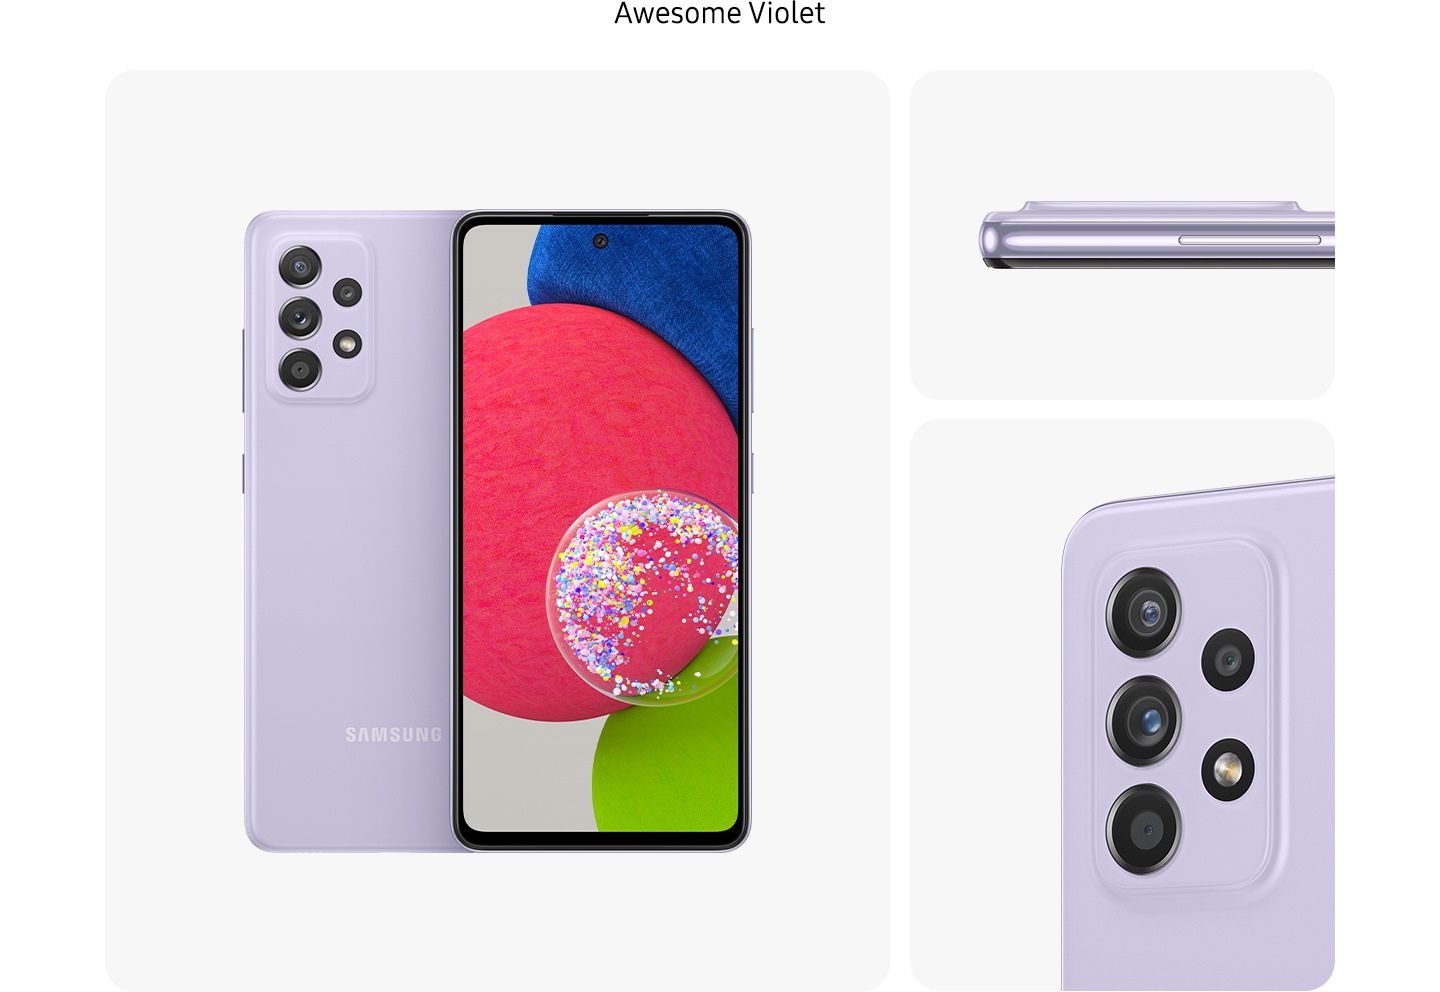 Galaxy A52s 5G in Awesome Violet, seen from multiple angles to show the design: rear, front, side and close-up on the rear camera.